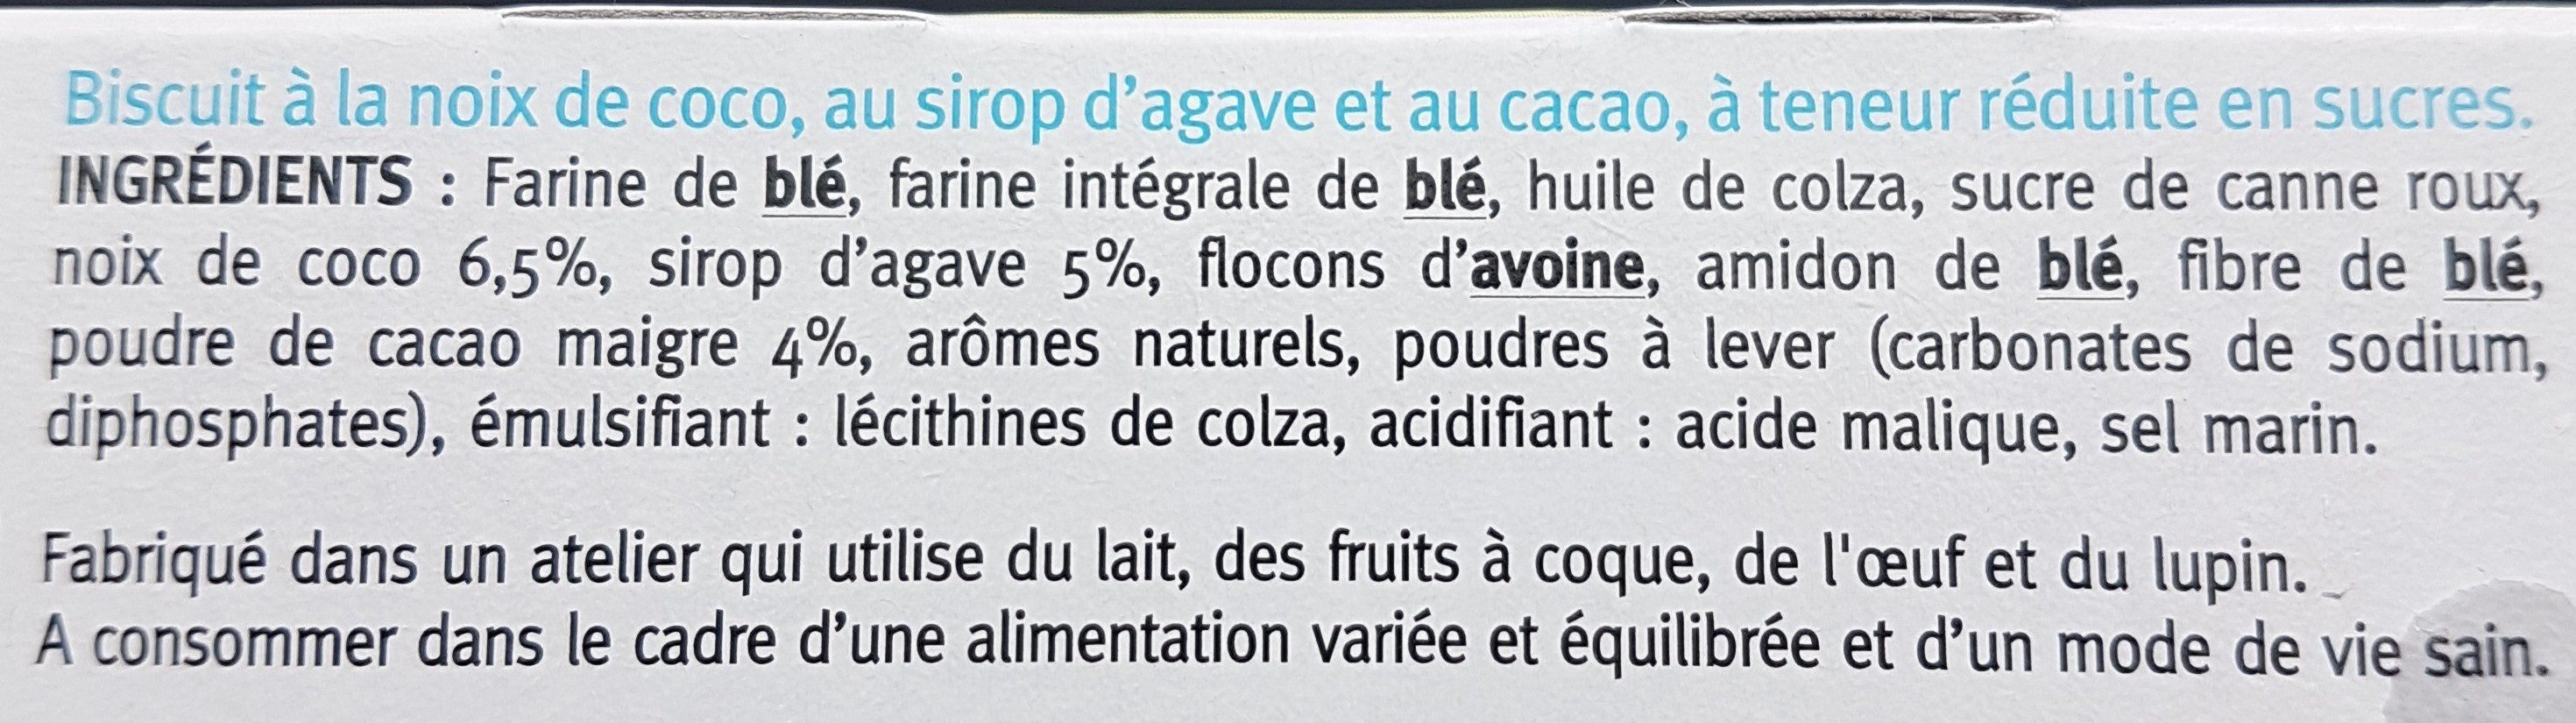 Sablé coco cacao au sirop d'agave - Ingredients - fr